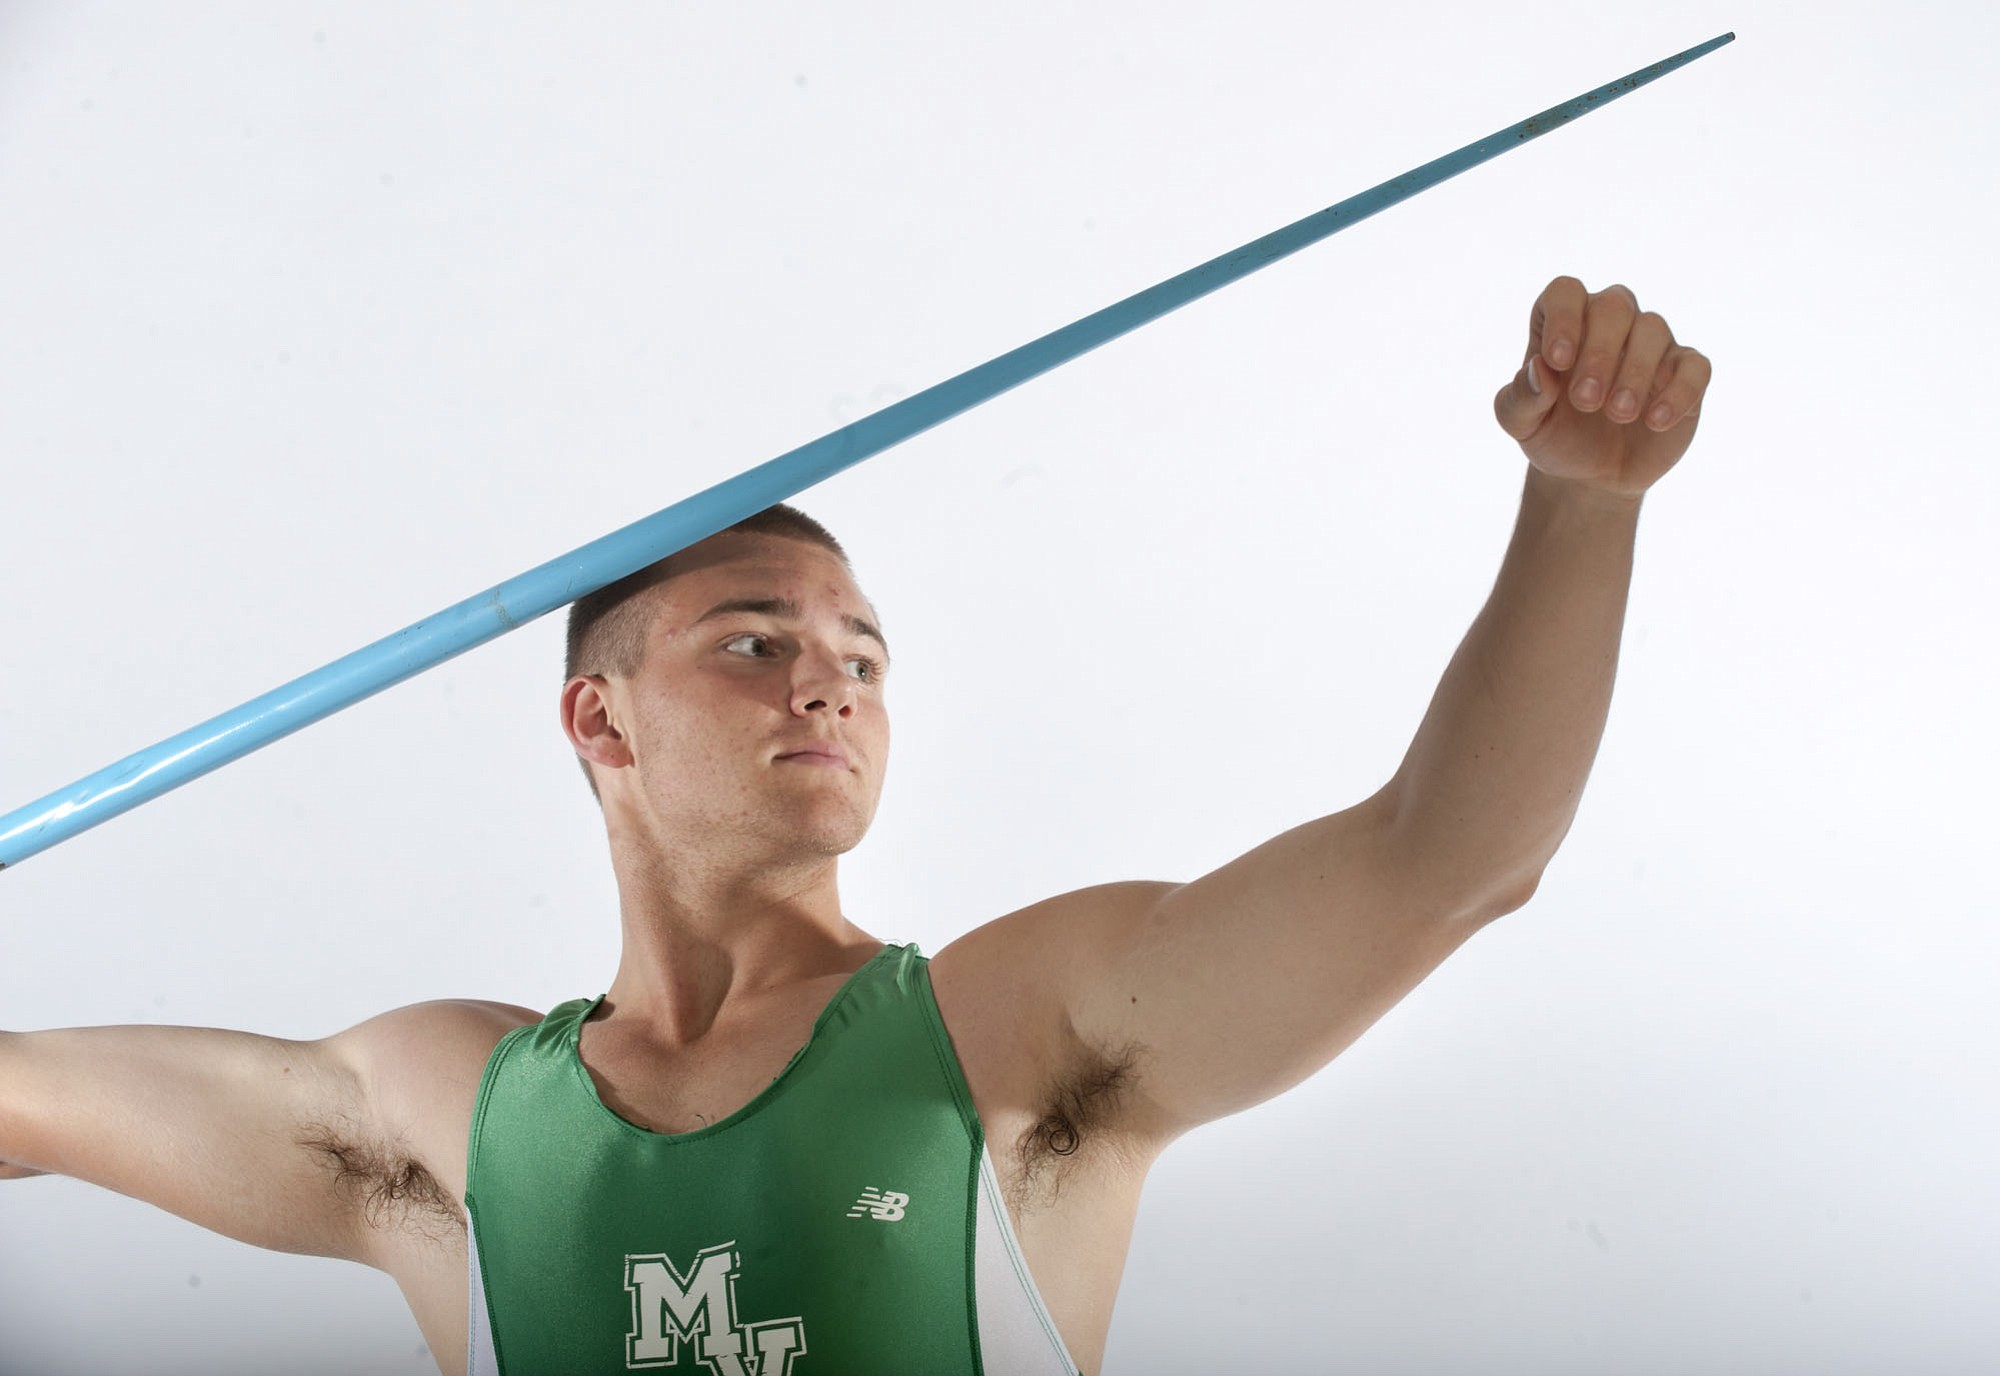 Mountain View senior Lexington Reese suffered a broken wrist in October that required surgery. But he recovered in time to rank among the state's top javelin throwers for most of the track and field season.